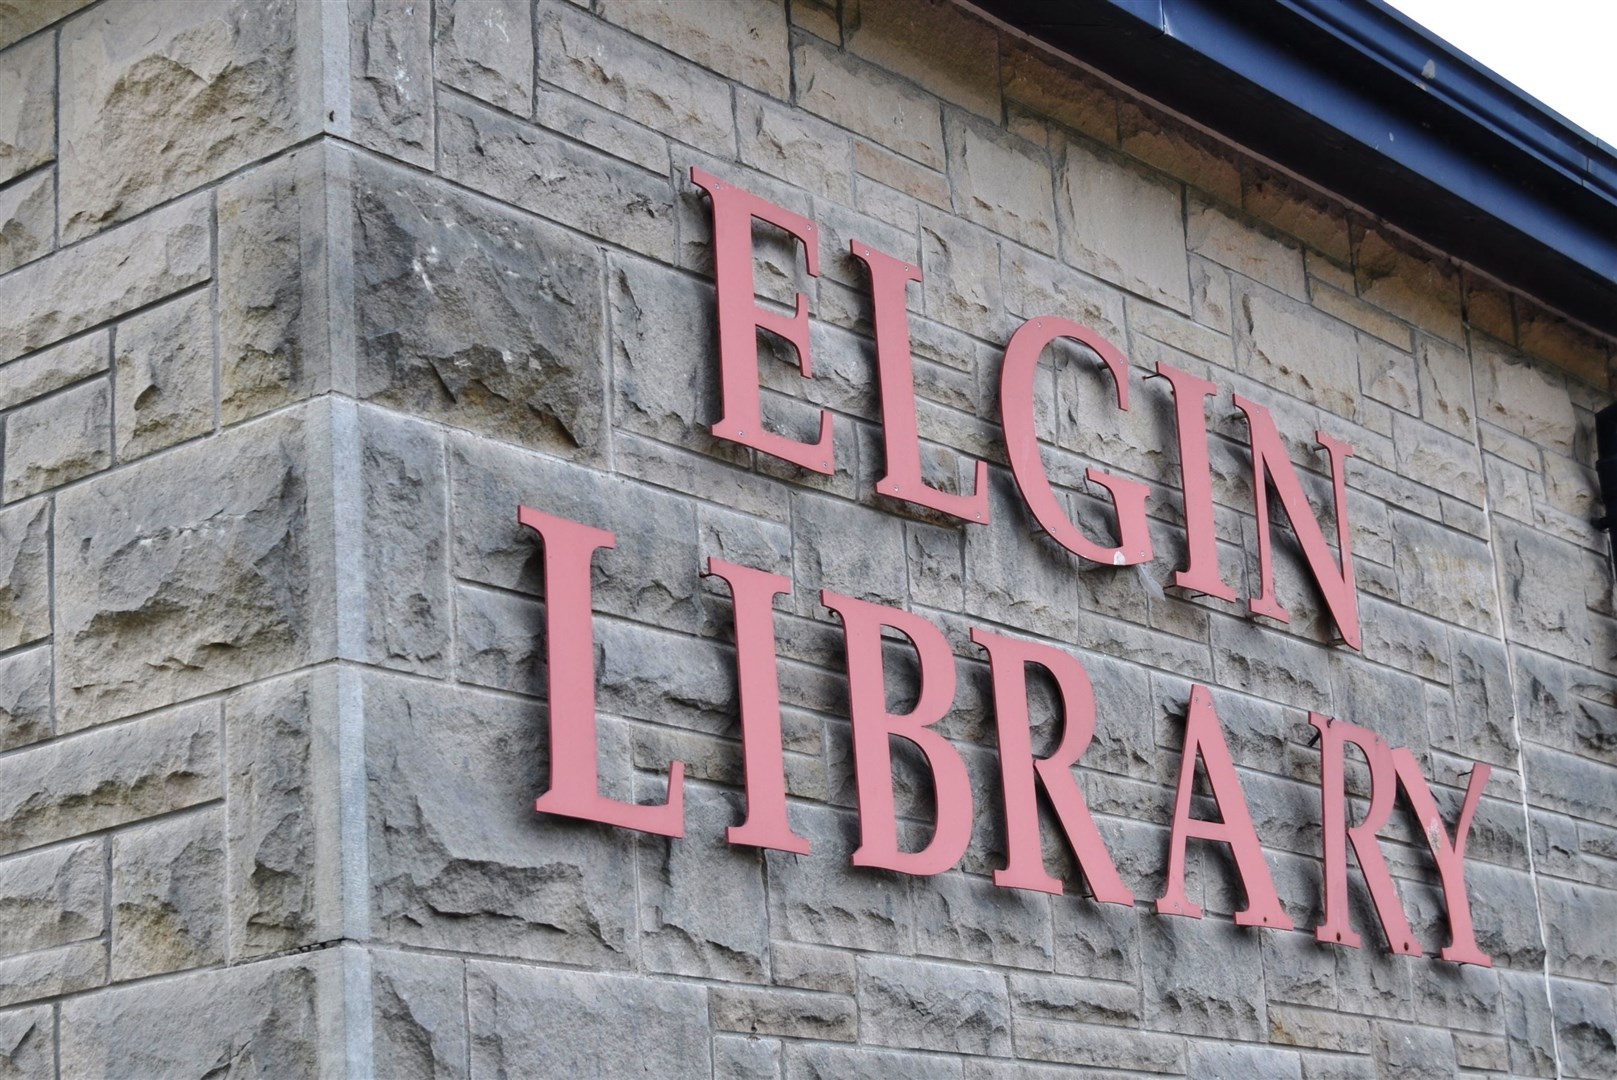 Elgin Library will host the exhibition until April 1.